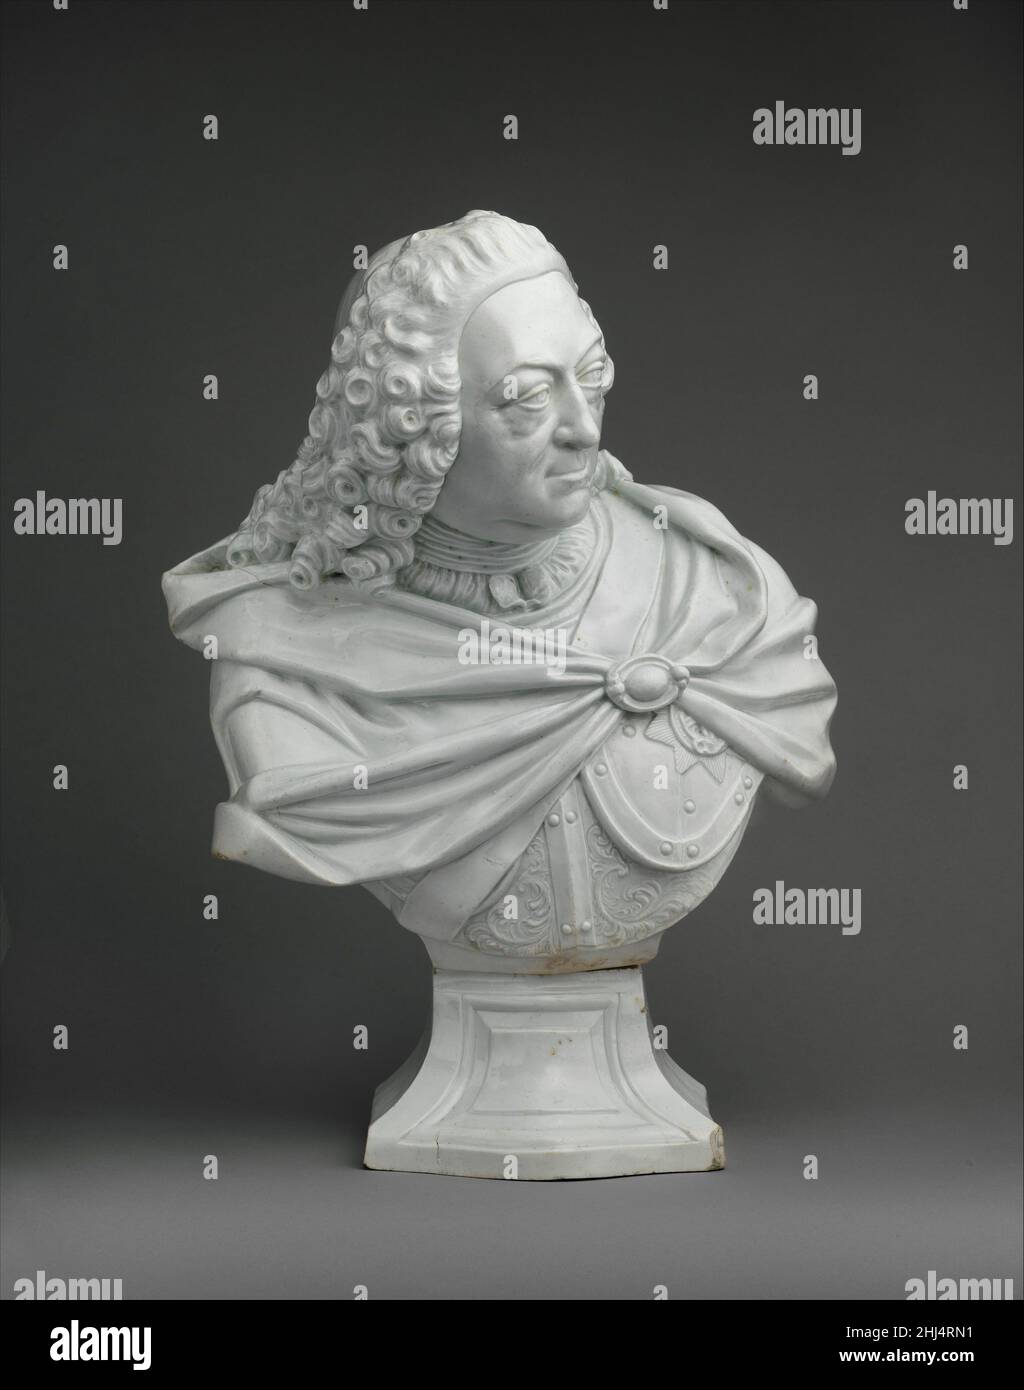 King George II ca. 1760 Vauxhall This large-scale portrait bust depicting  George II (1683–1760), king of Britain, is one of nineteen examples  known,[1] and these busts are commonly regarded as among the